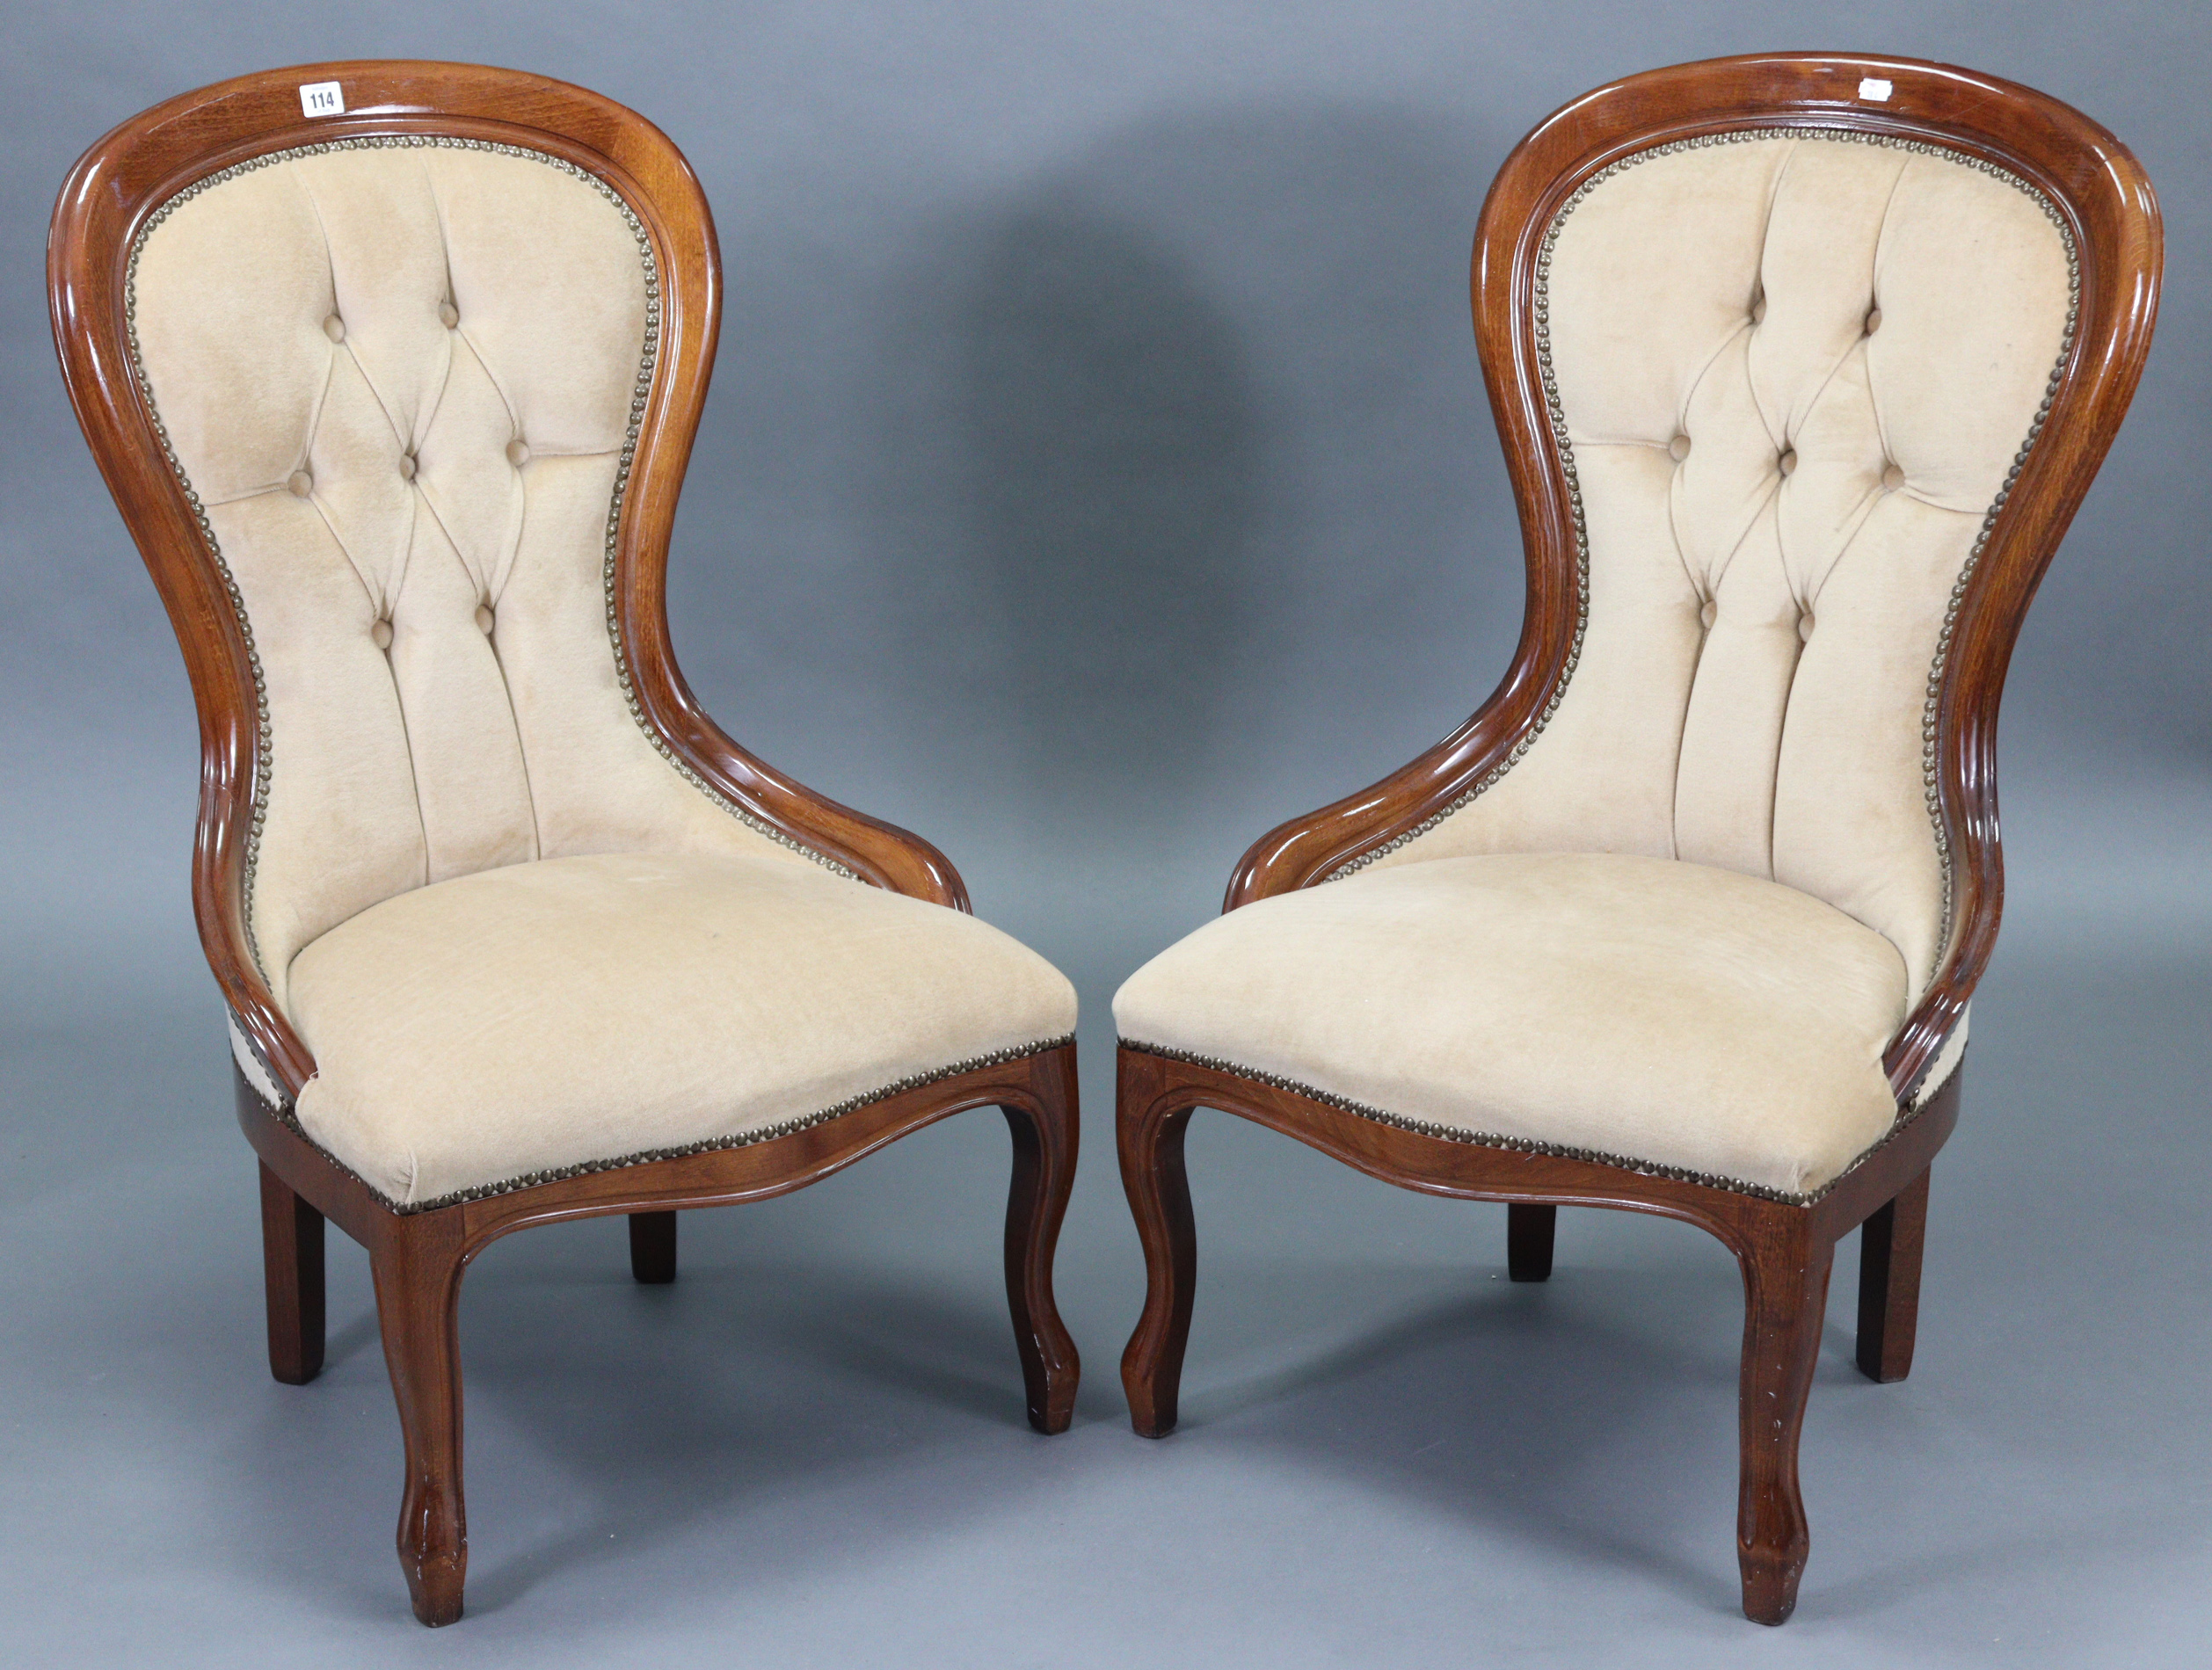 A pair of Victorian-style spoon-back easy chairs each with sprung seat & buttoned-back upholstered